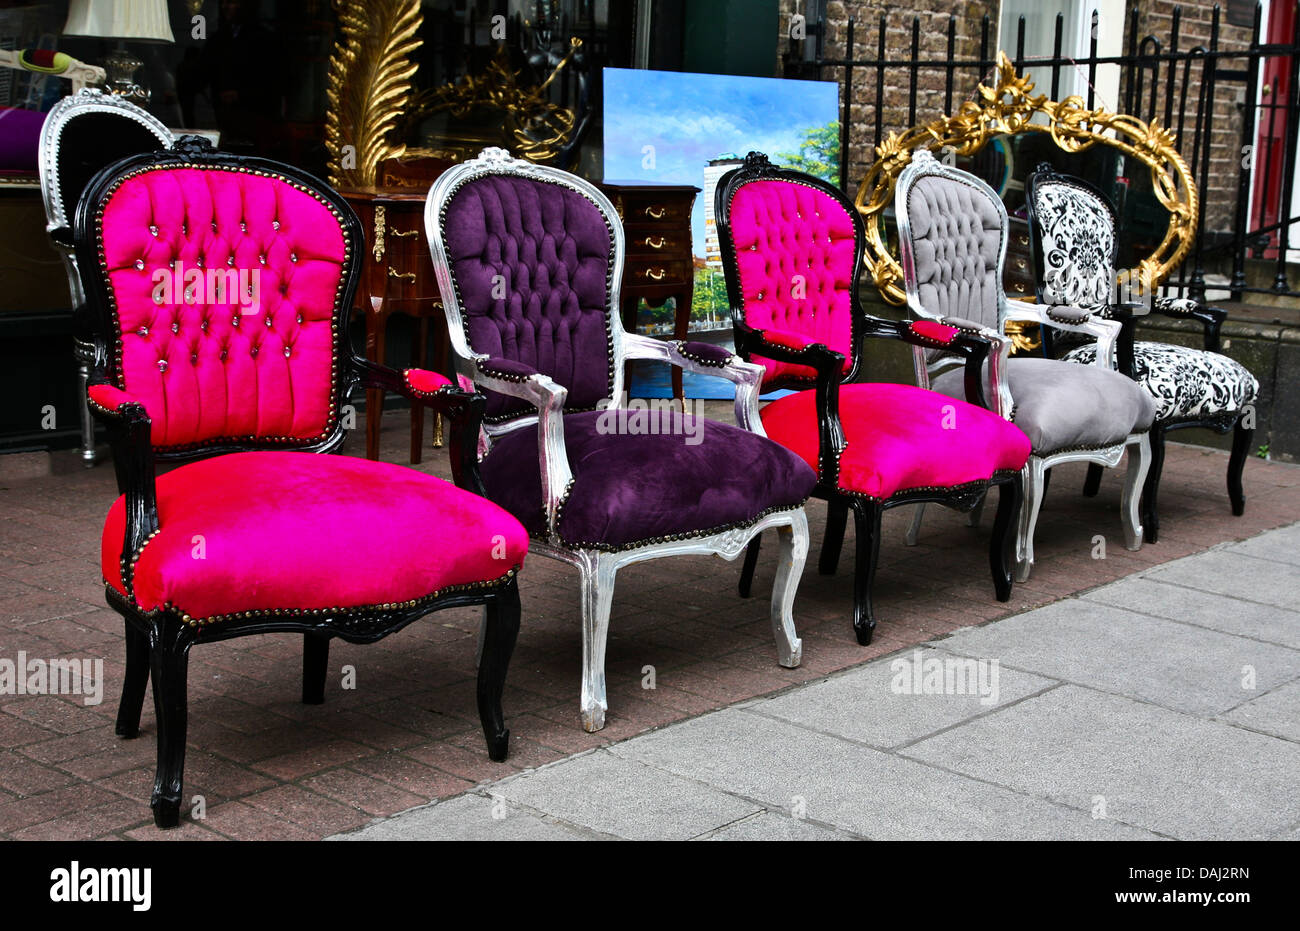 Colorful outdoor close up Victorian antique chairs displayed in a row in front of an antique store in Dublin, Ireland, vintage objects, chair abstract Stock Photo